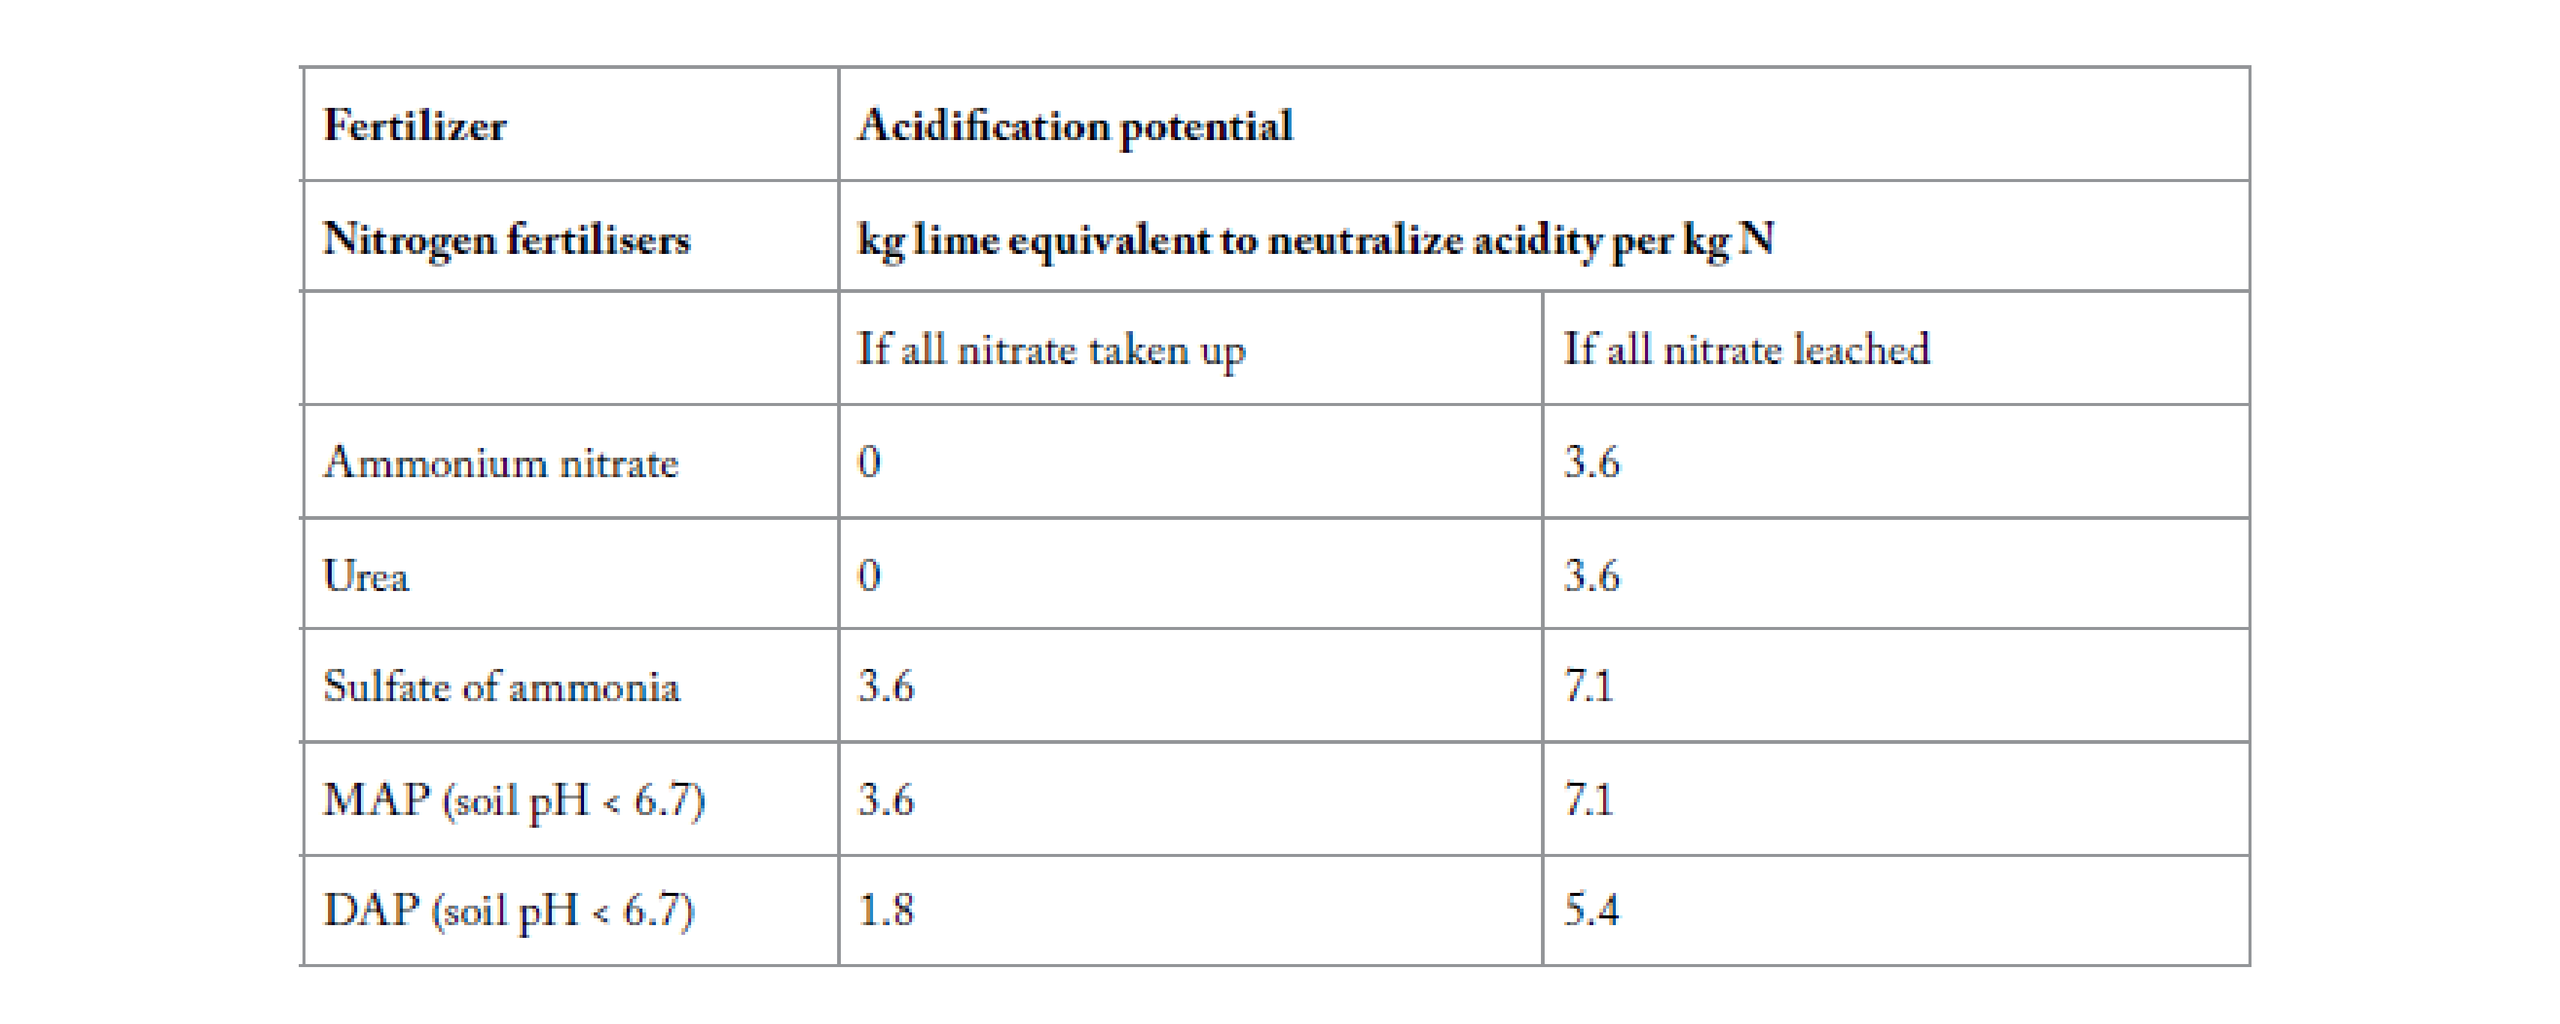 5. Acidification potential for various N, P and S fertilisers expressed as kg lime equivalent per kg of N, P or S applied